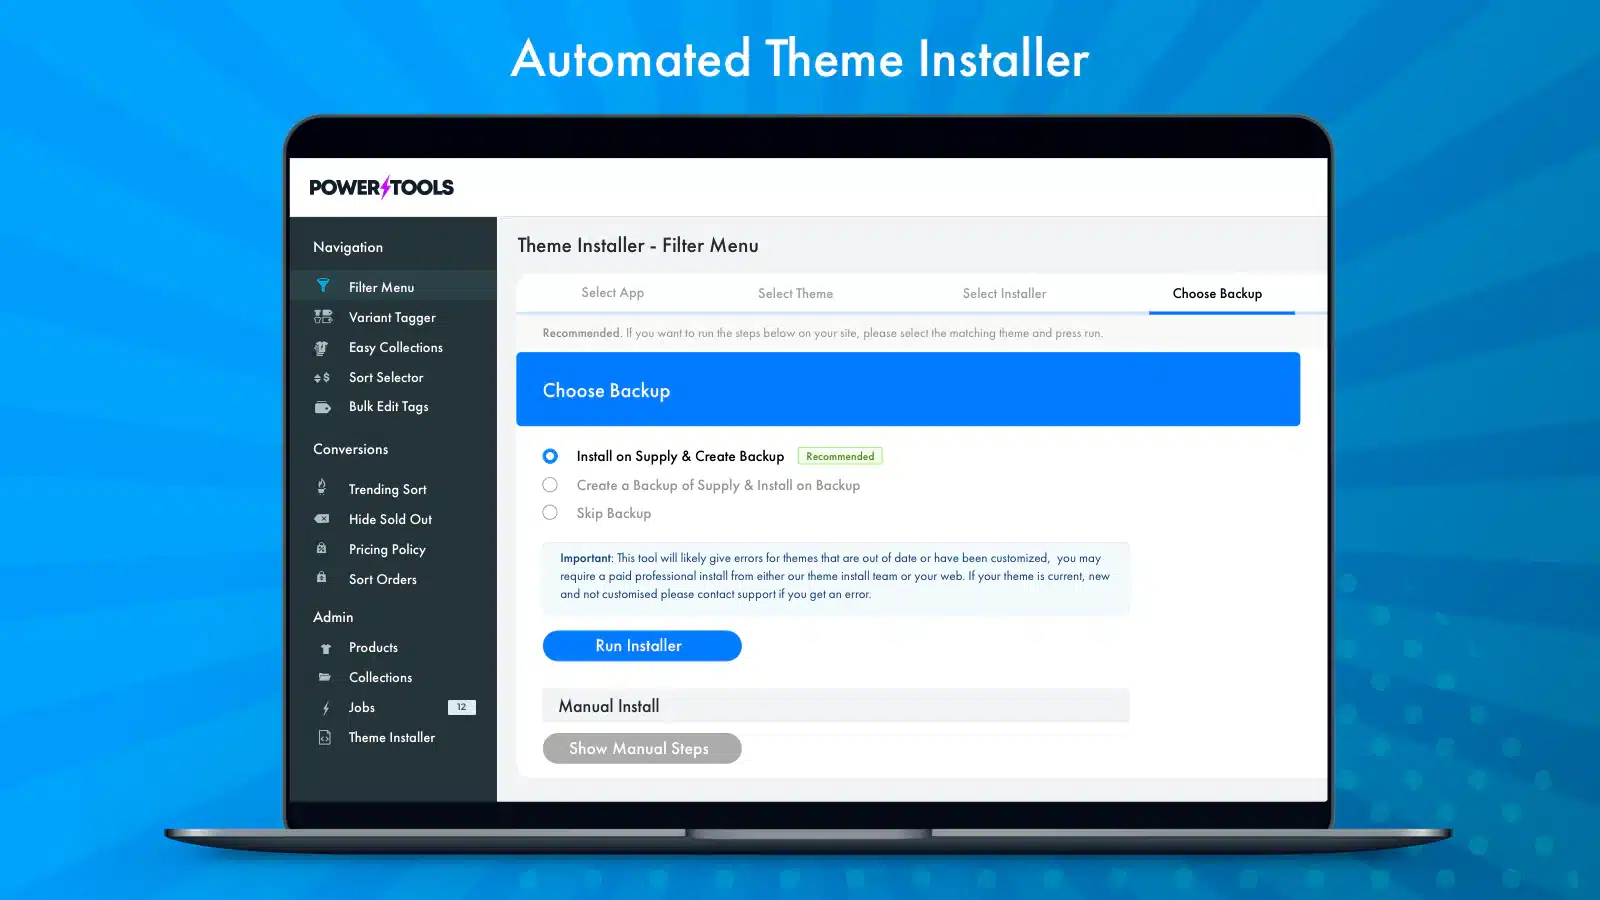 power-tools-filter-menu-automated-theme-installer